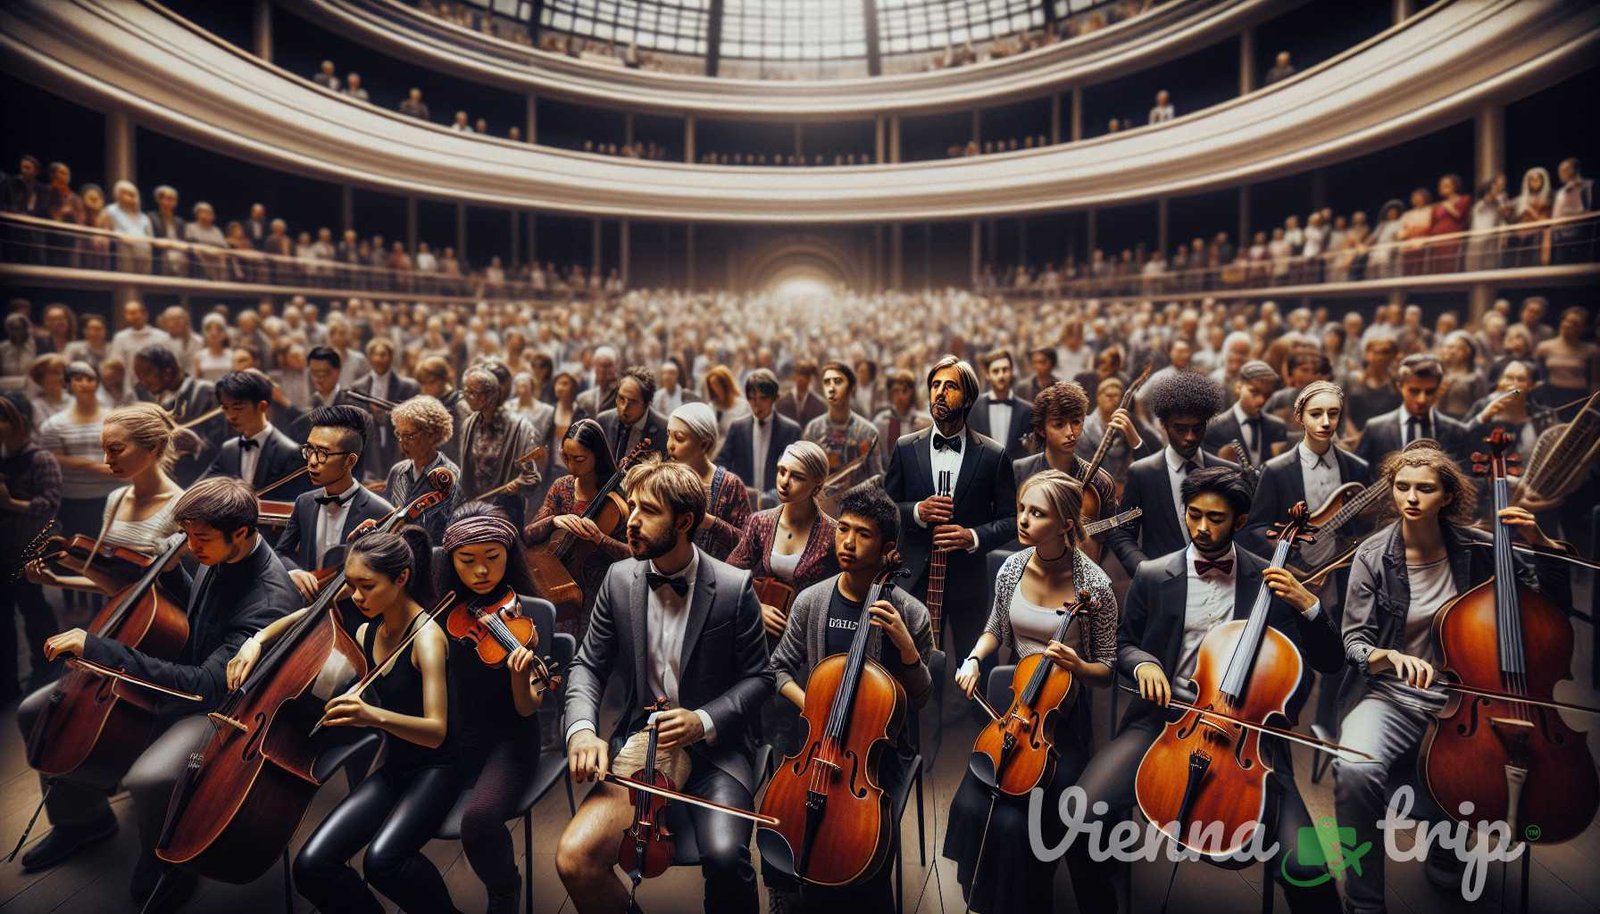 Illustration for section: Furthermore, various prestigious international music competitions take place in Vienna, attracting t - vienna harmony